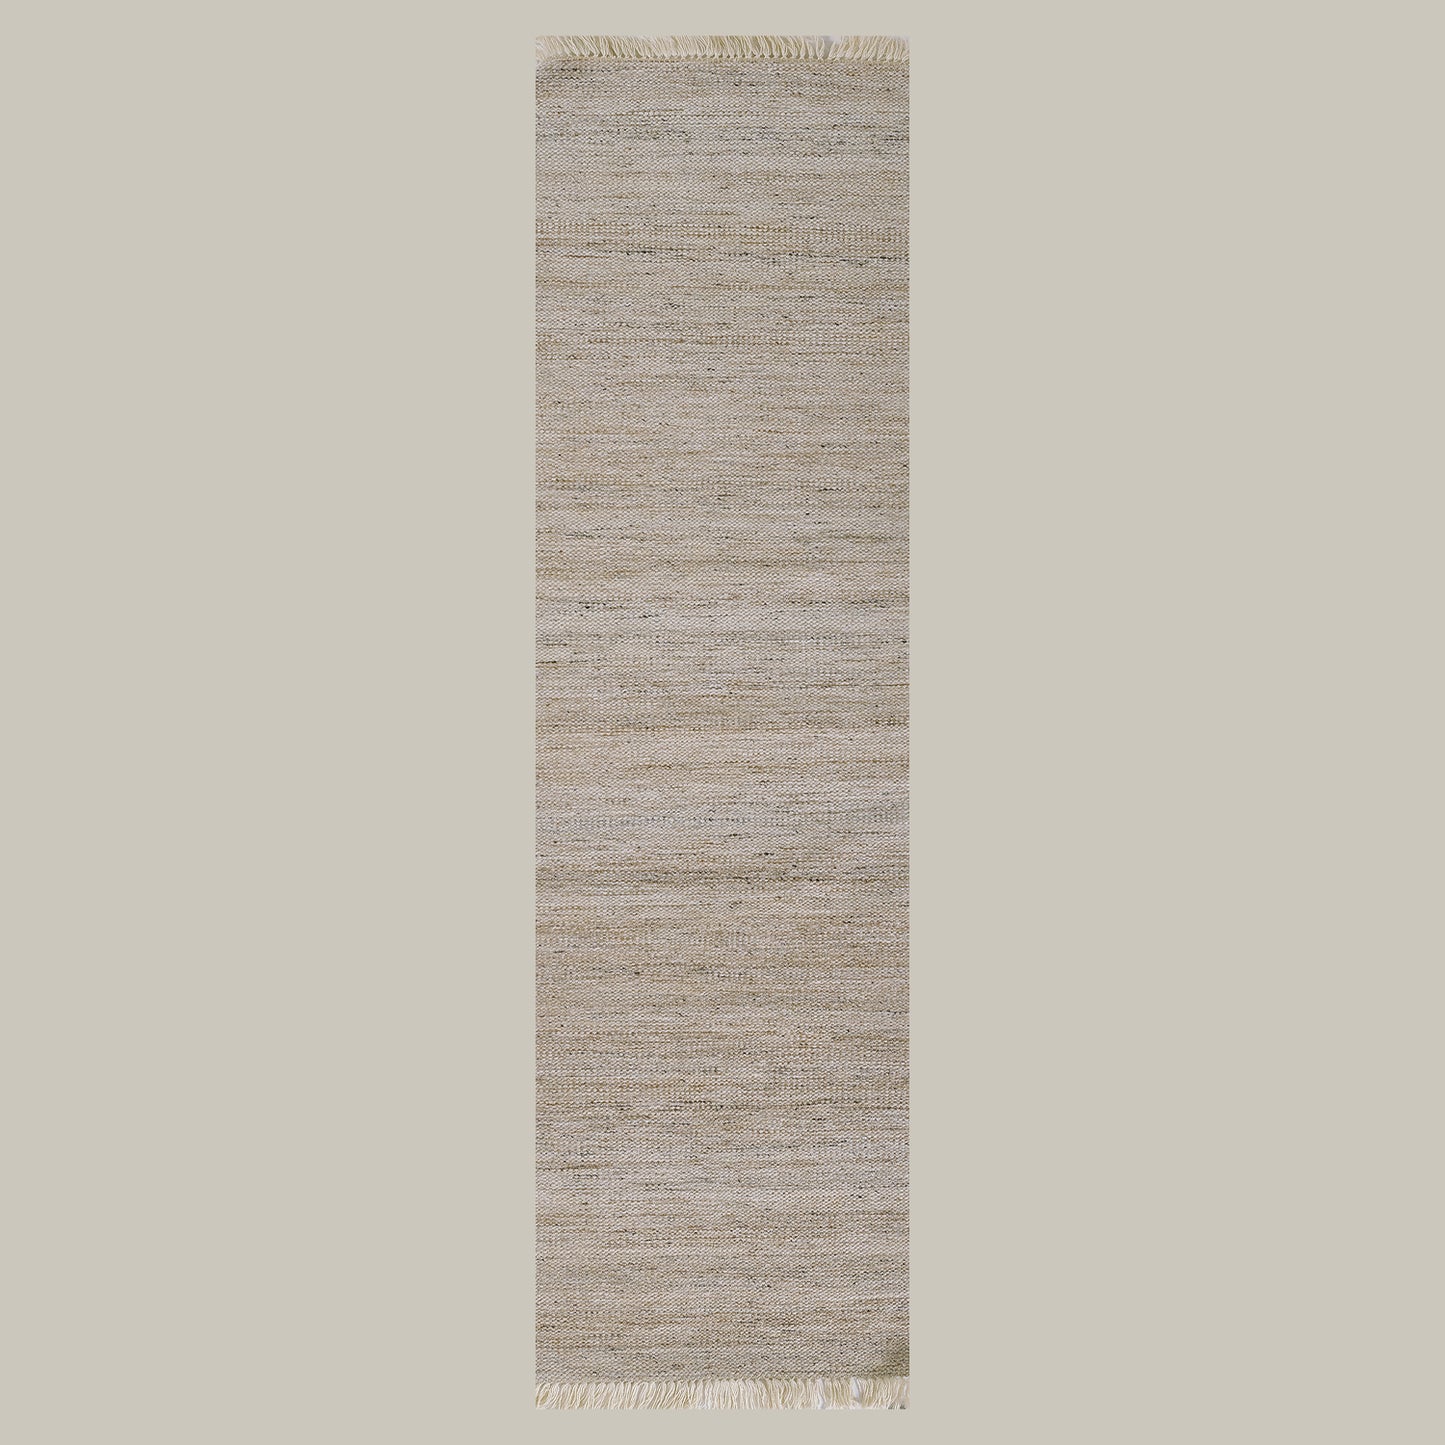 Andoise Outdoor Rug (Natural)